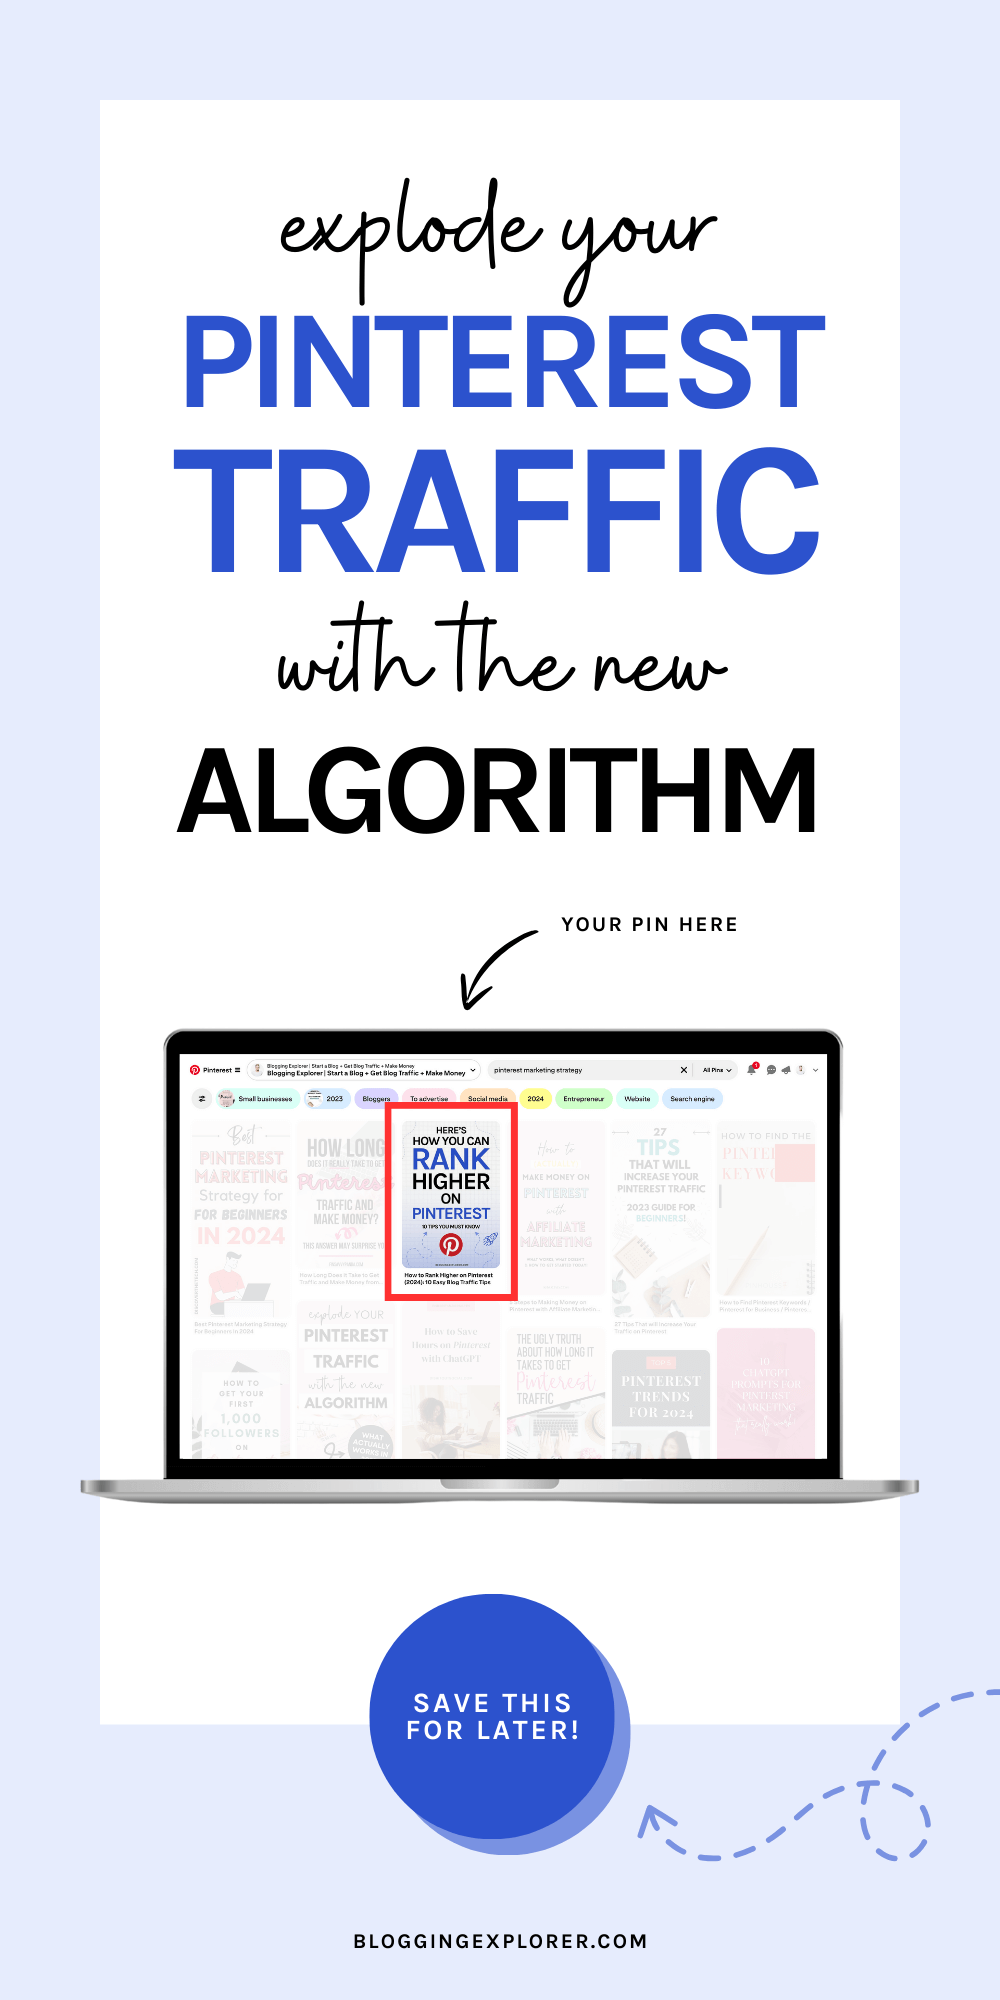 Explode your Pinterest traffic with the new Pinterest algorithm